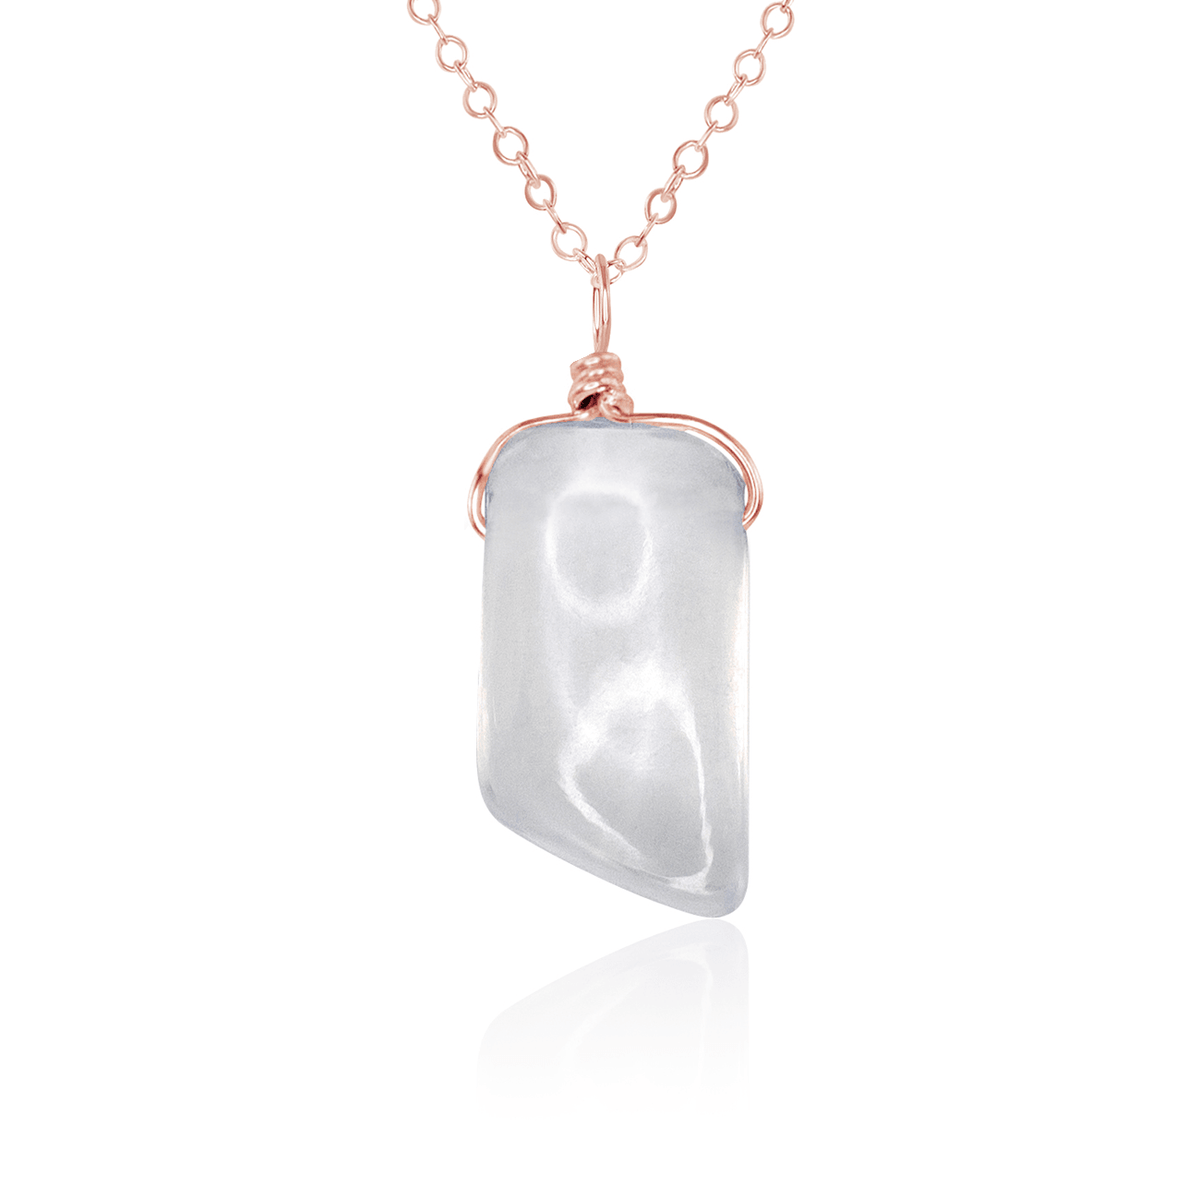 Small Smooth Crystal Quartz Gentle Point Crystal Pendant Necklace - Small Smooth Crystal Quartz Gentle Point Crystal Pendant Necklace - 14k Rose Gold Fill / Cable - Luna Tide Handmade Crystal Jewellery